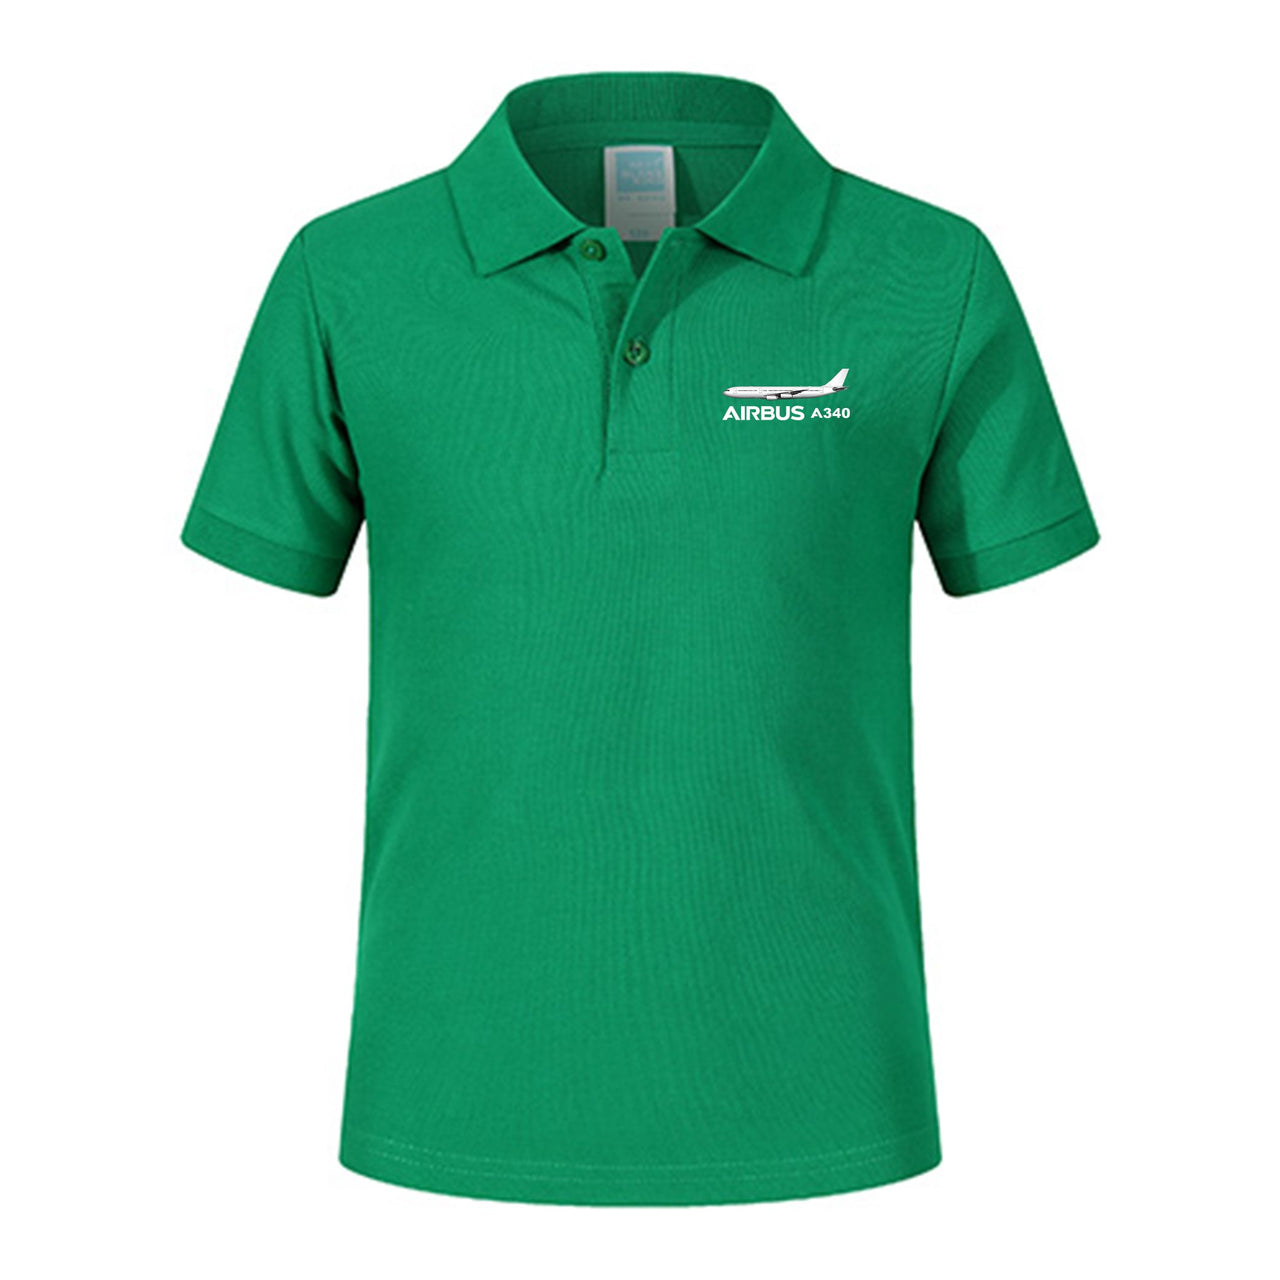 The Airbus A340 Designed Children Polo T-Shirts